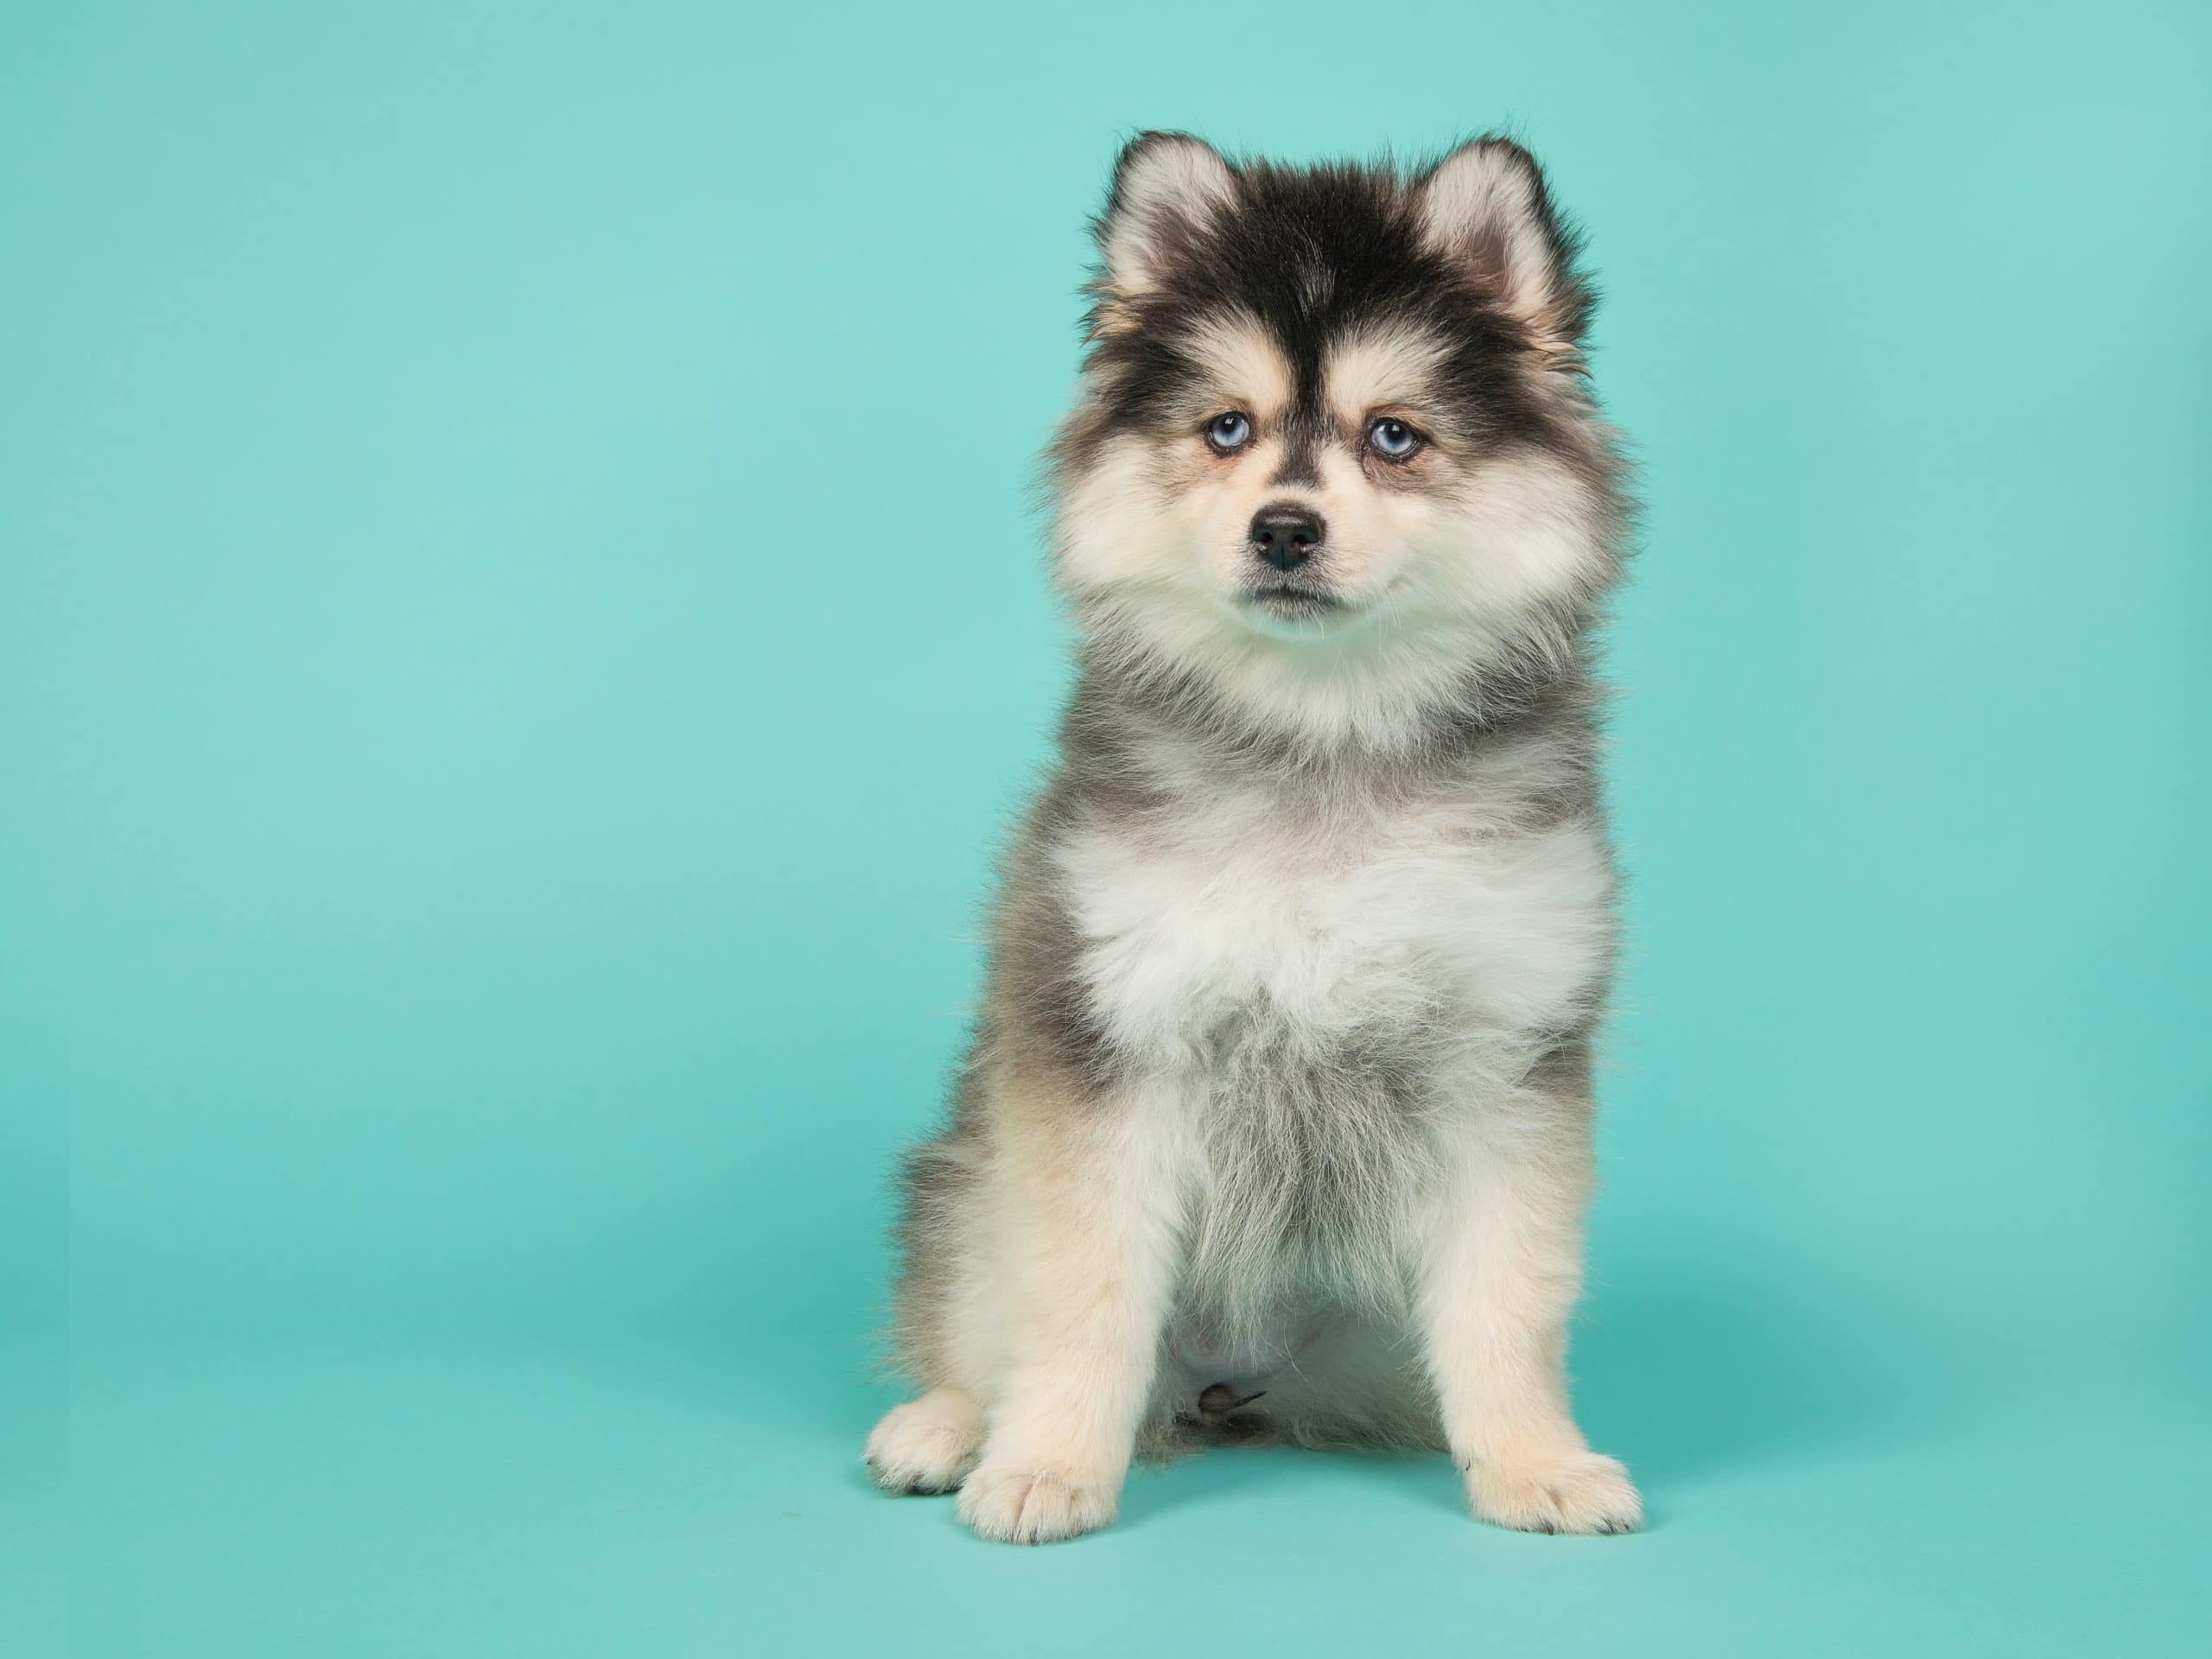 pomsky puppy sitting in front of a blue background